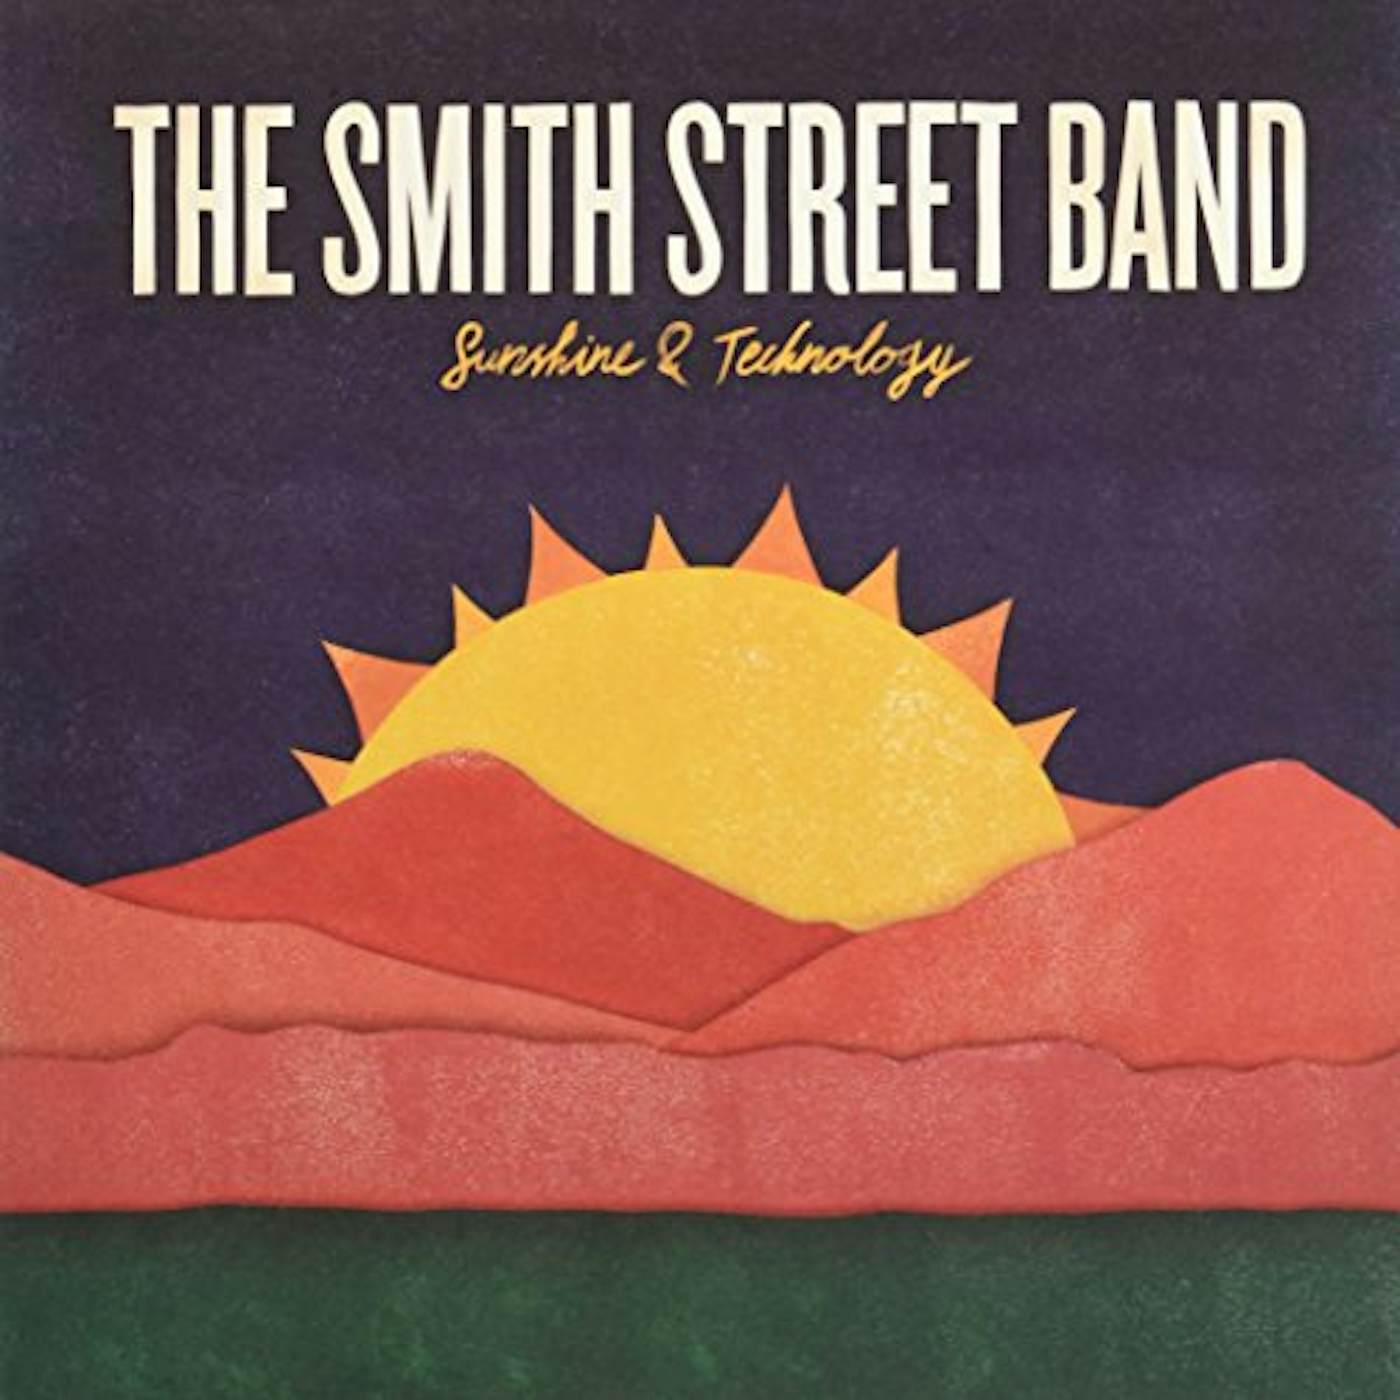 The Smith Street Band Sunshine and Technology Vinyl Record